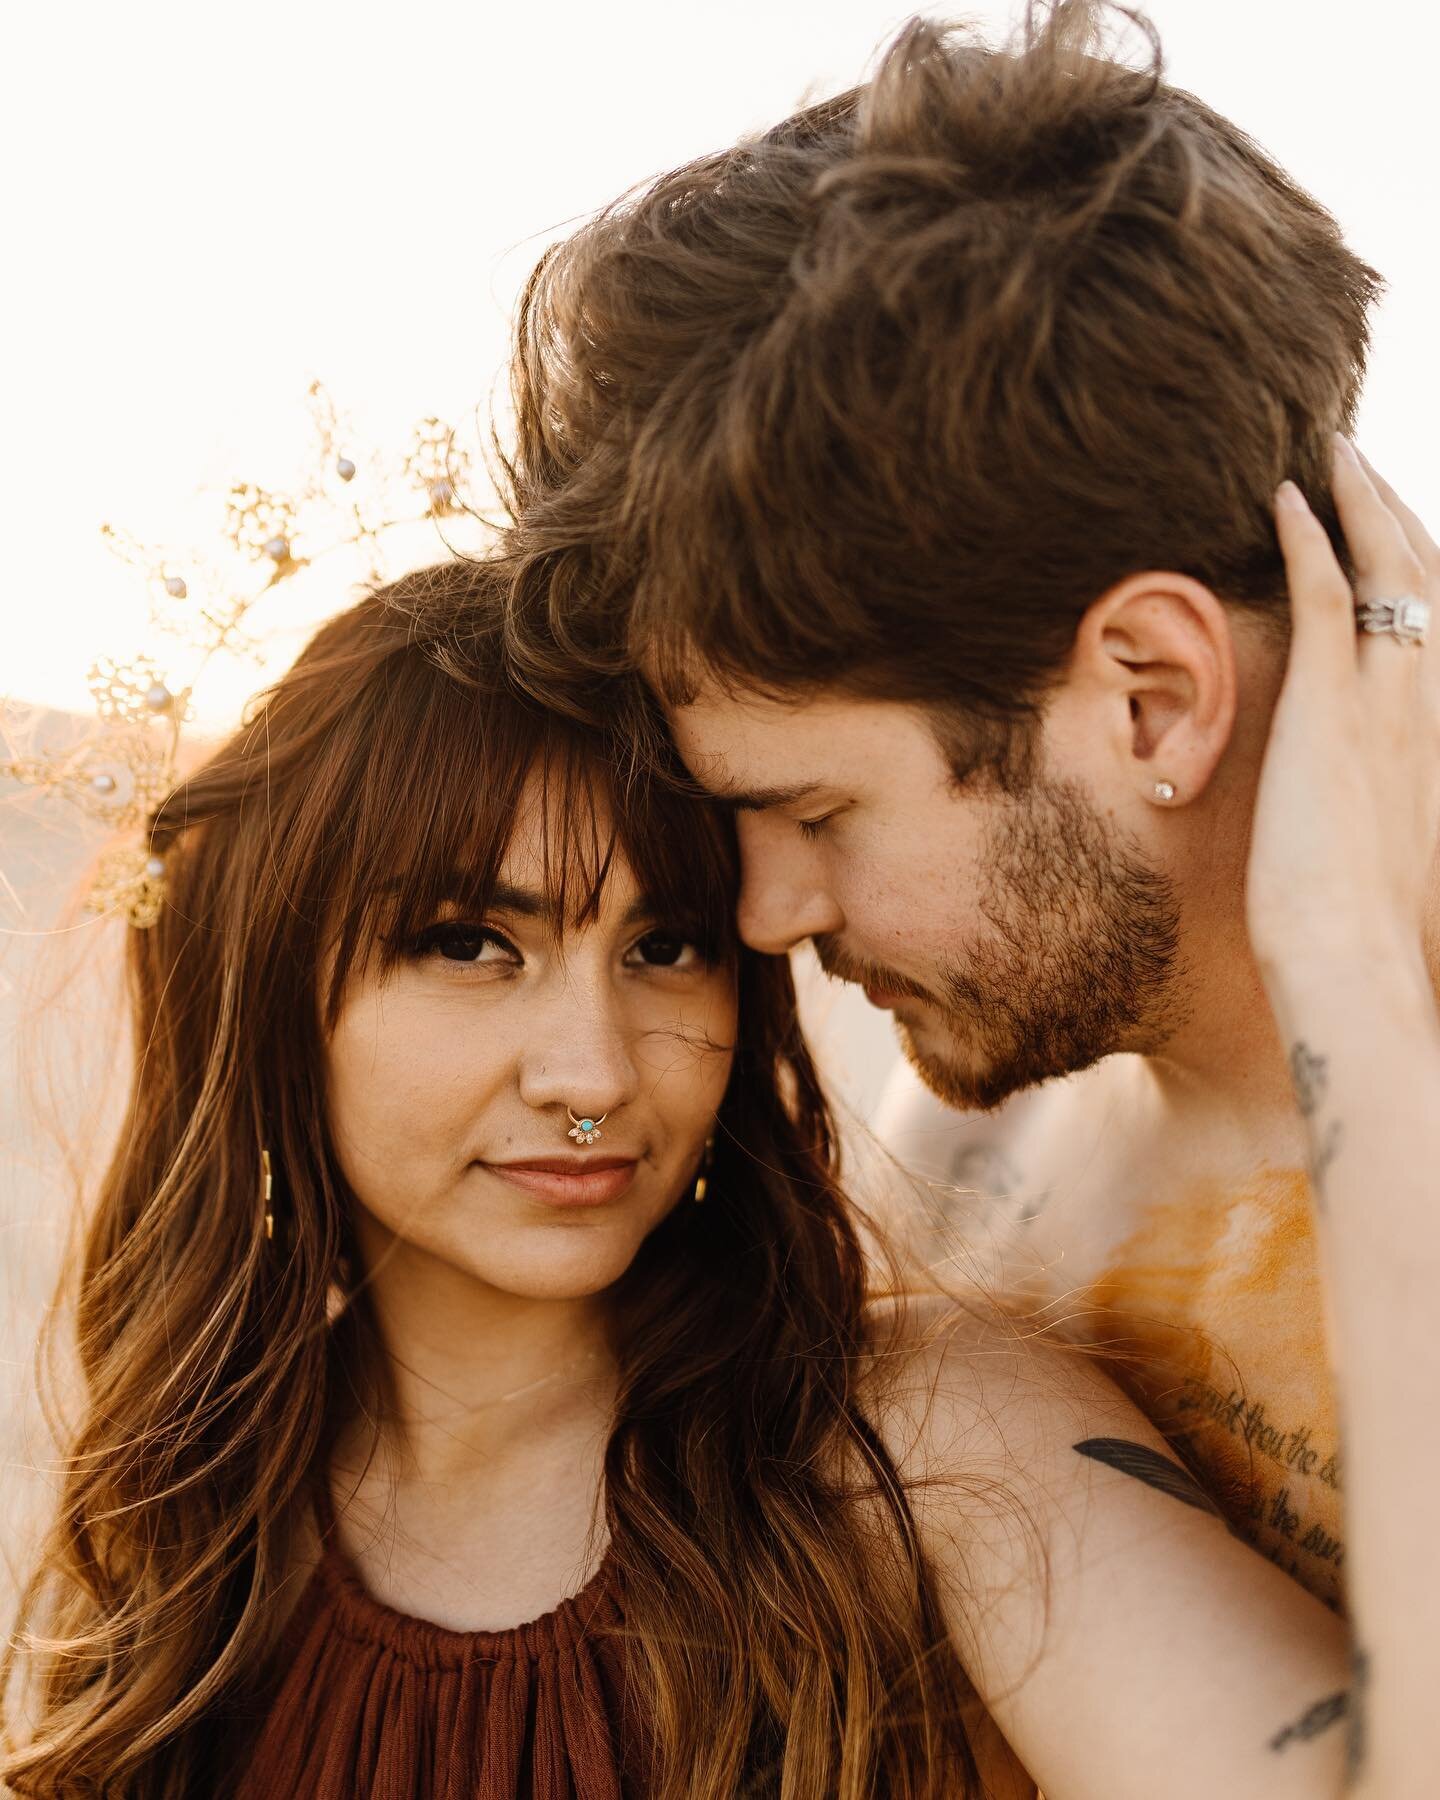 &ldquo;Whatever our souls are made of, his and mine are the same.&rdquo;

This photoshoot will always be such a dream come true and I truly can not wait for the next time I get to do a session in sand dunes